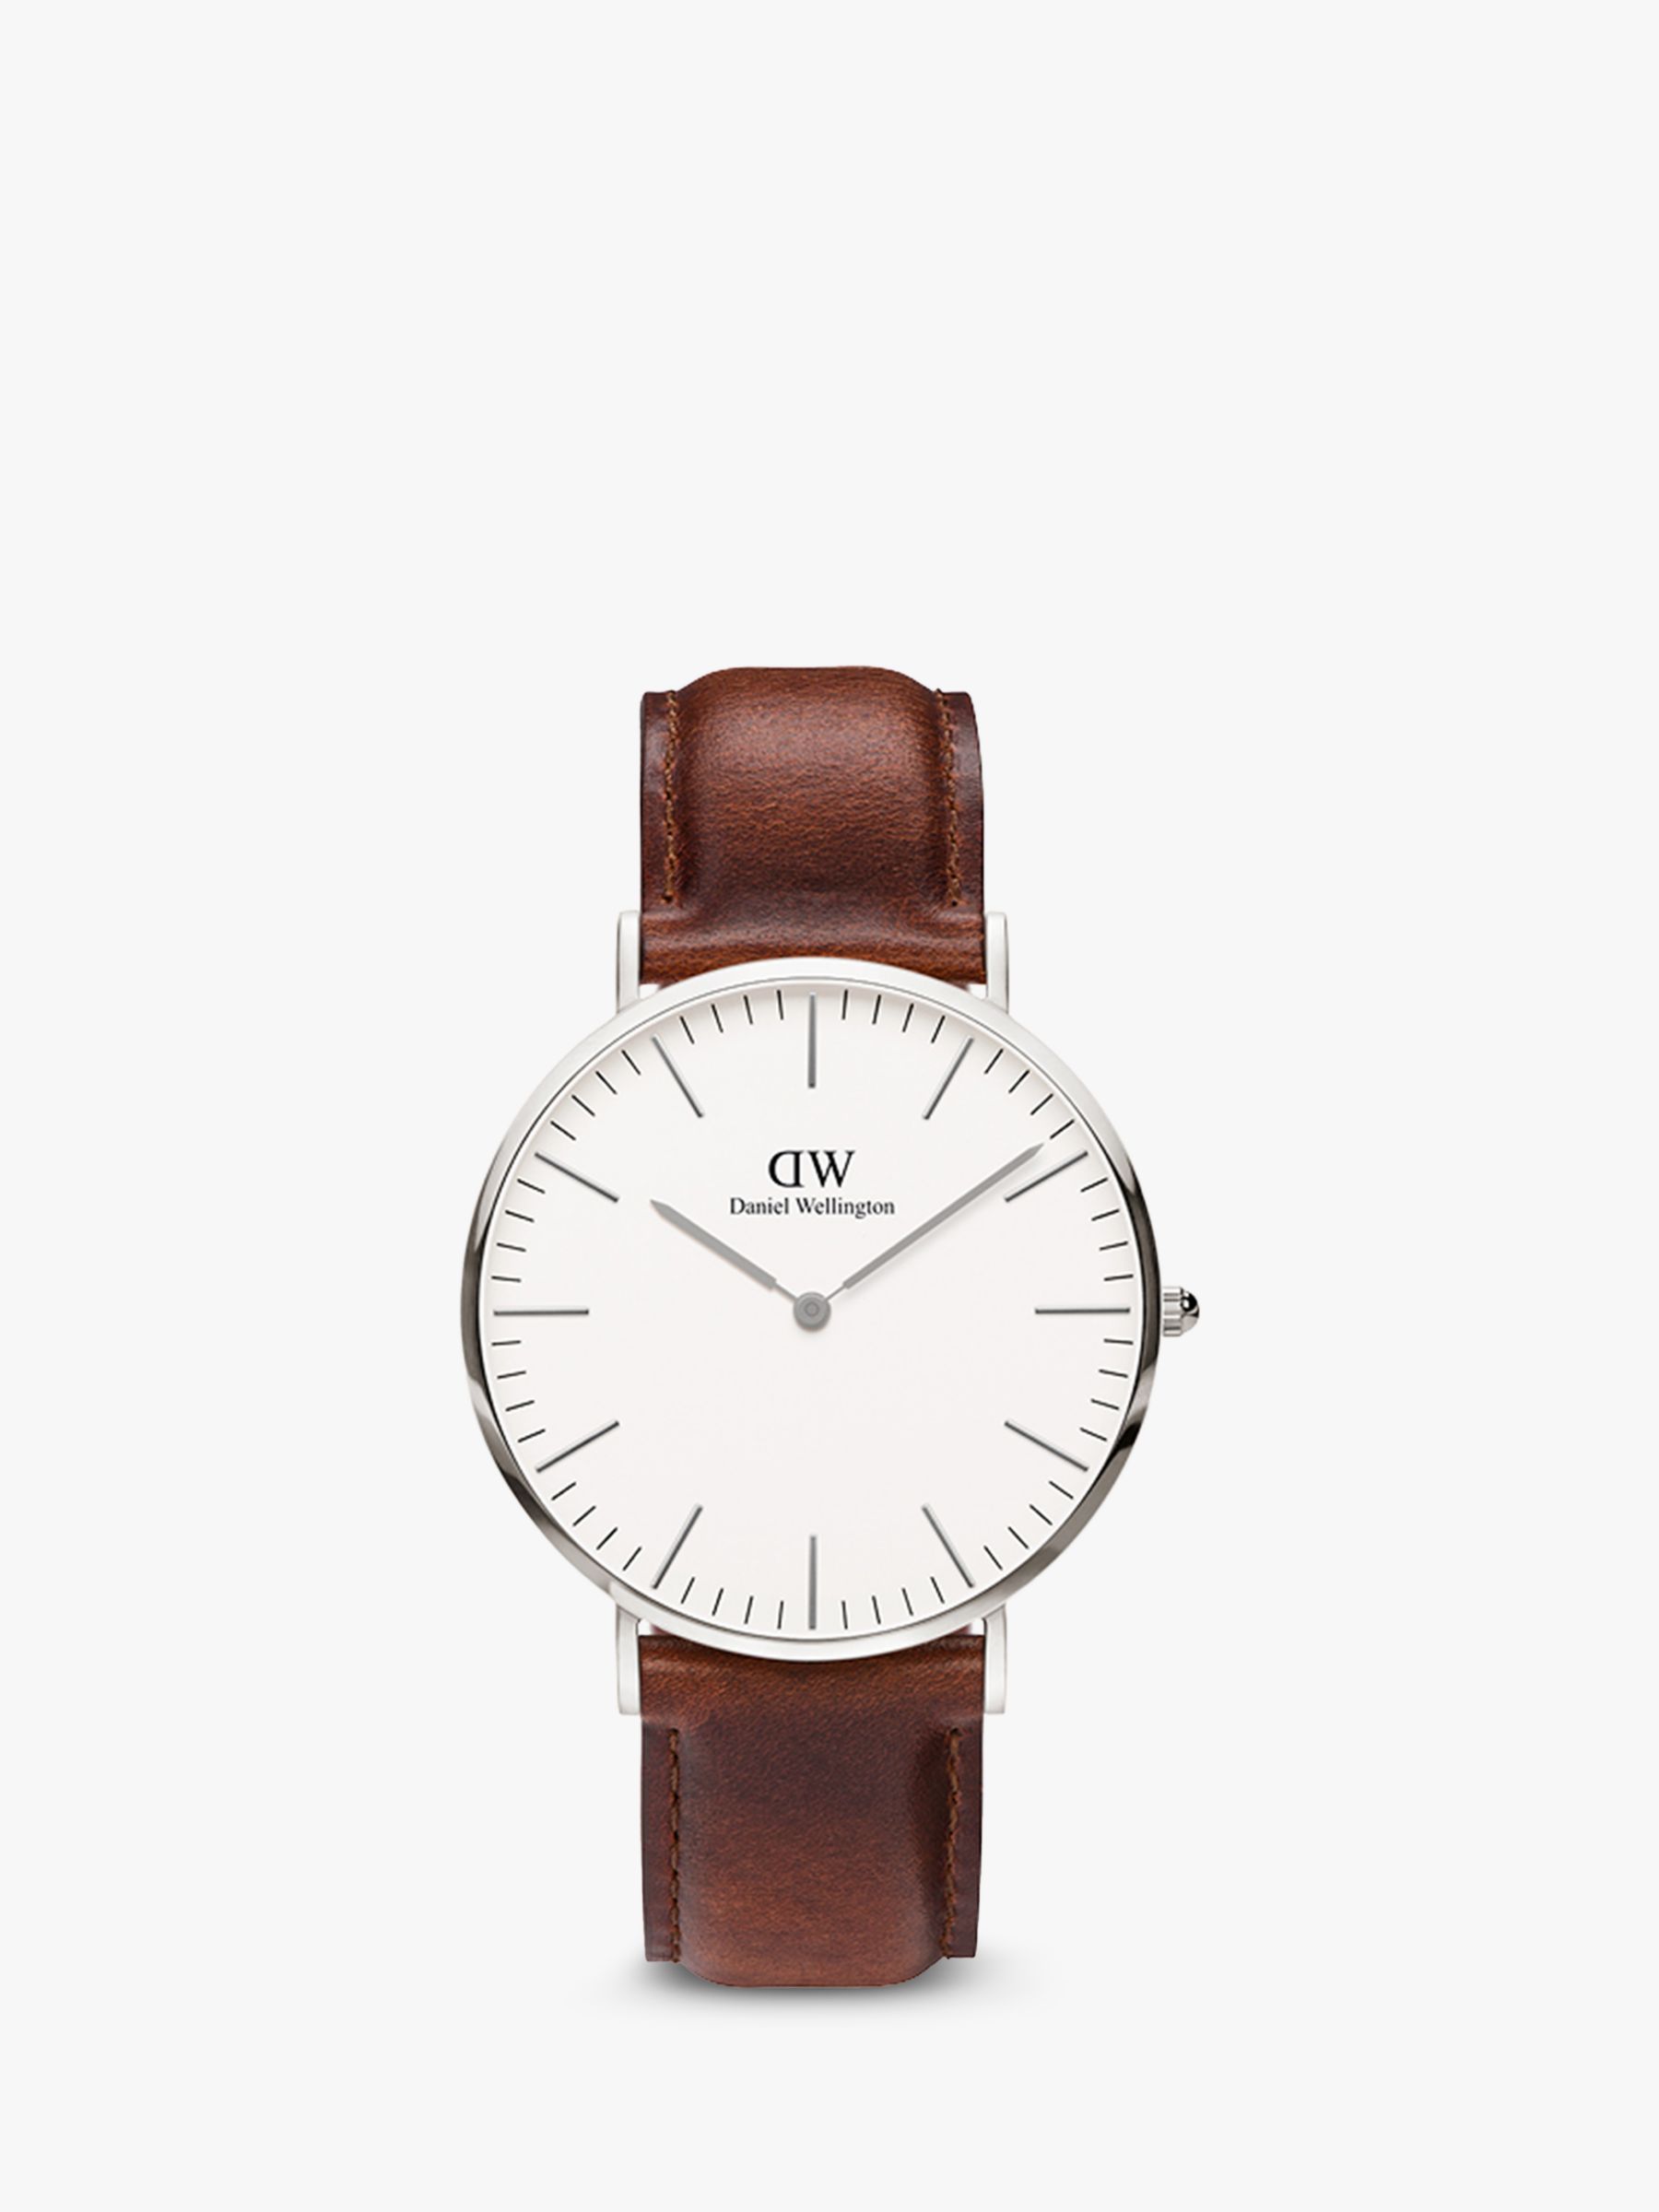 mulighed Krudt plade Daniel Wellington DW00100021 Men's 40mm Classic St. Mawes Leather Strap  Watch, Brown/White at John Lewis & Partners